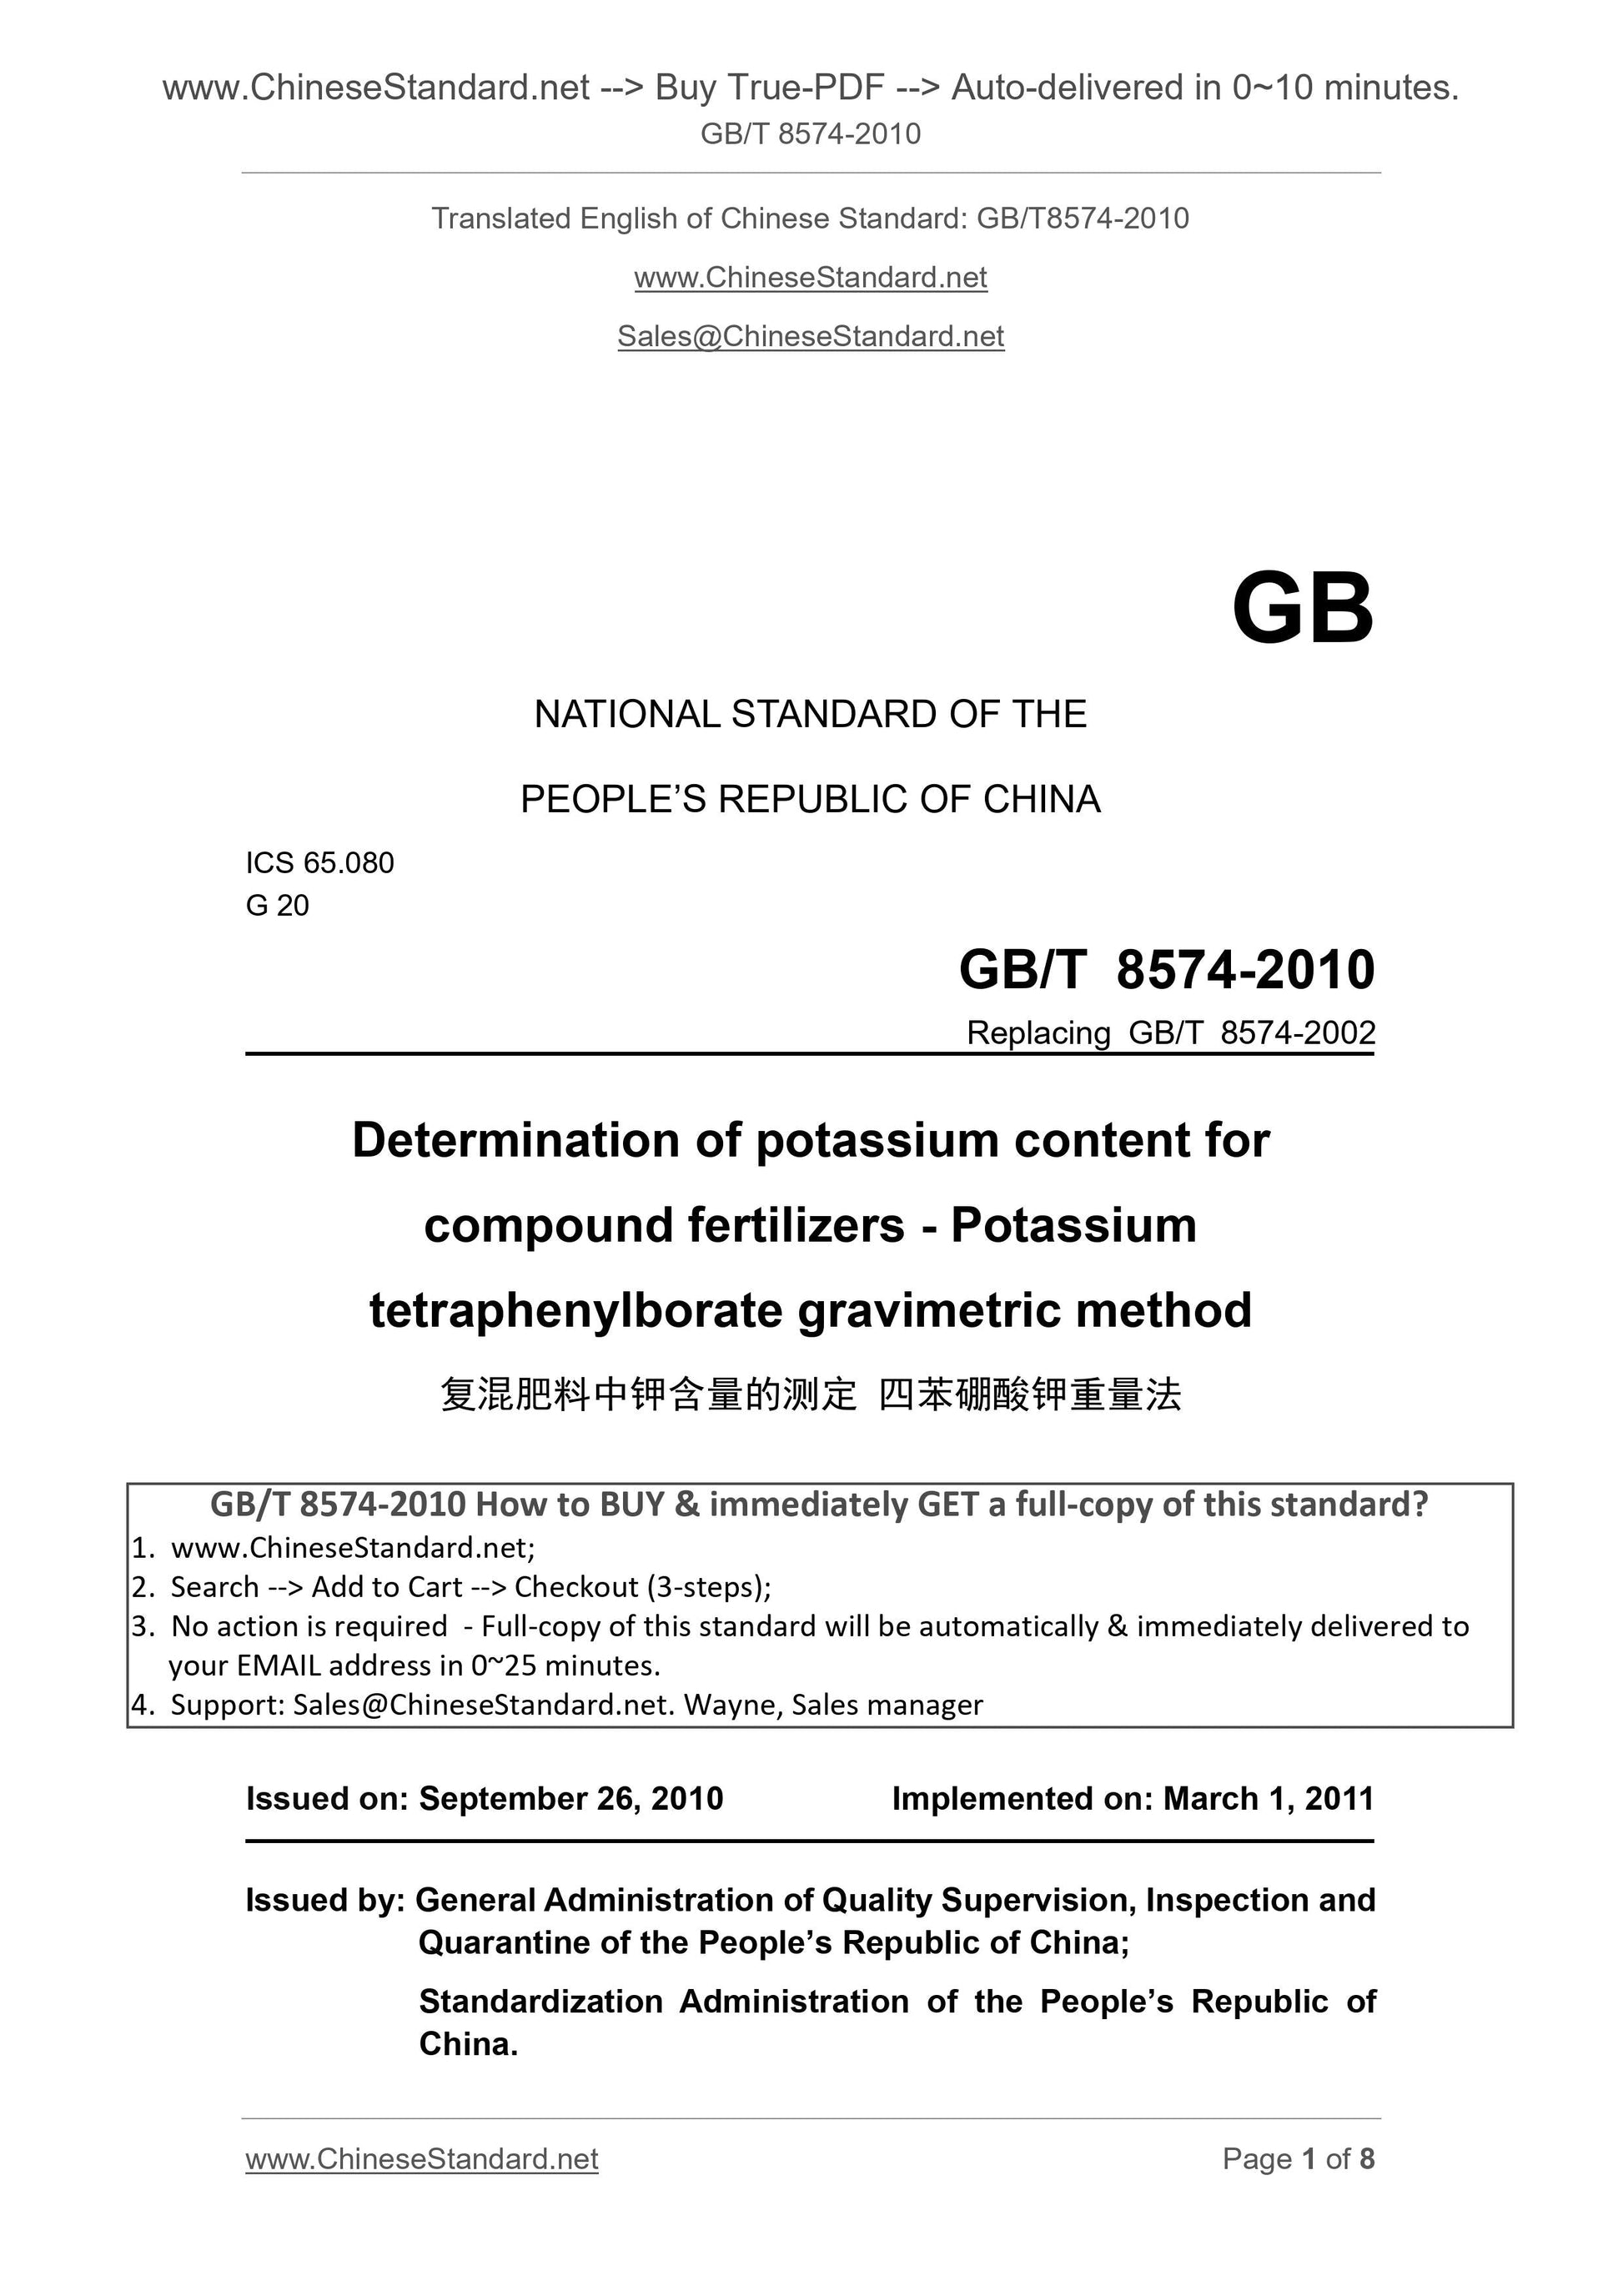 GB/T 8574-2010 Page 1